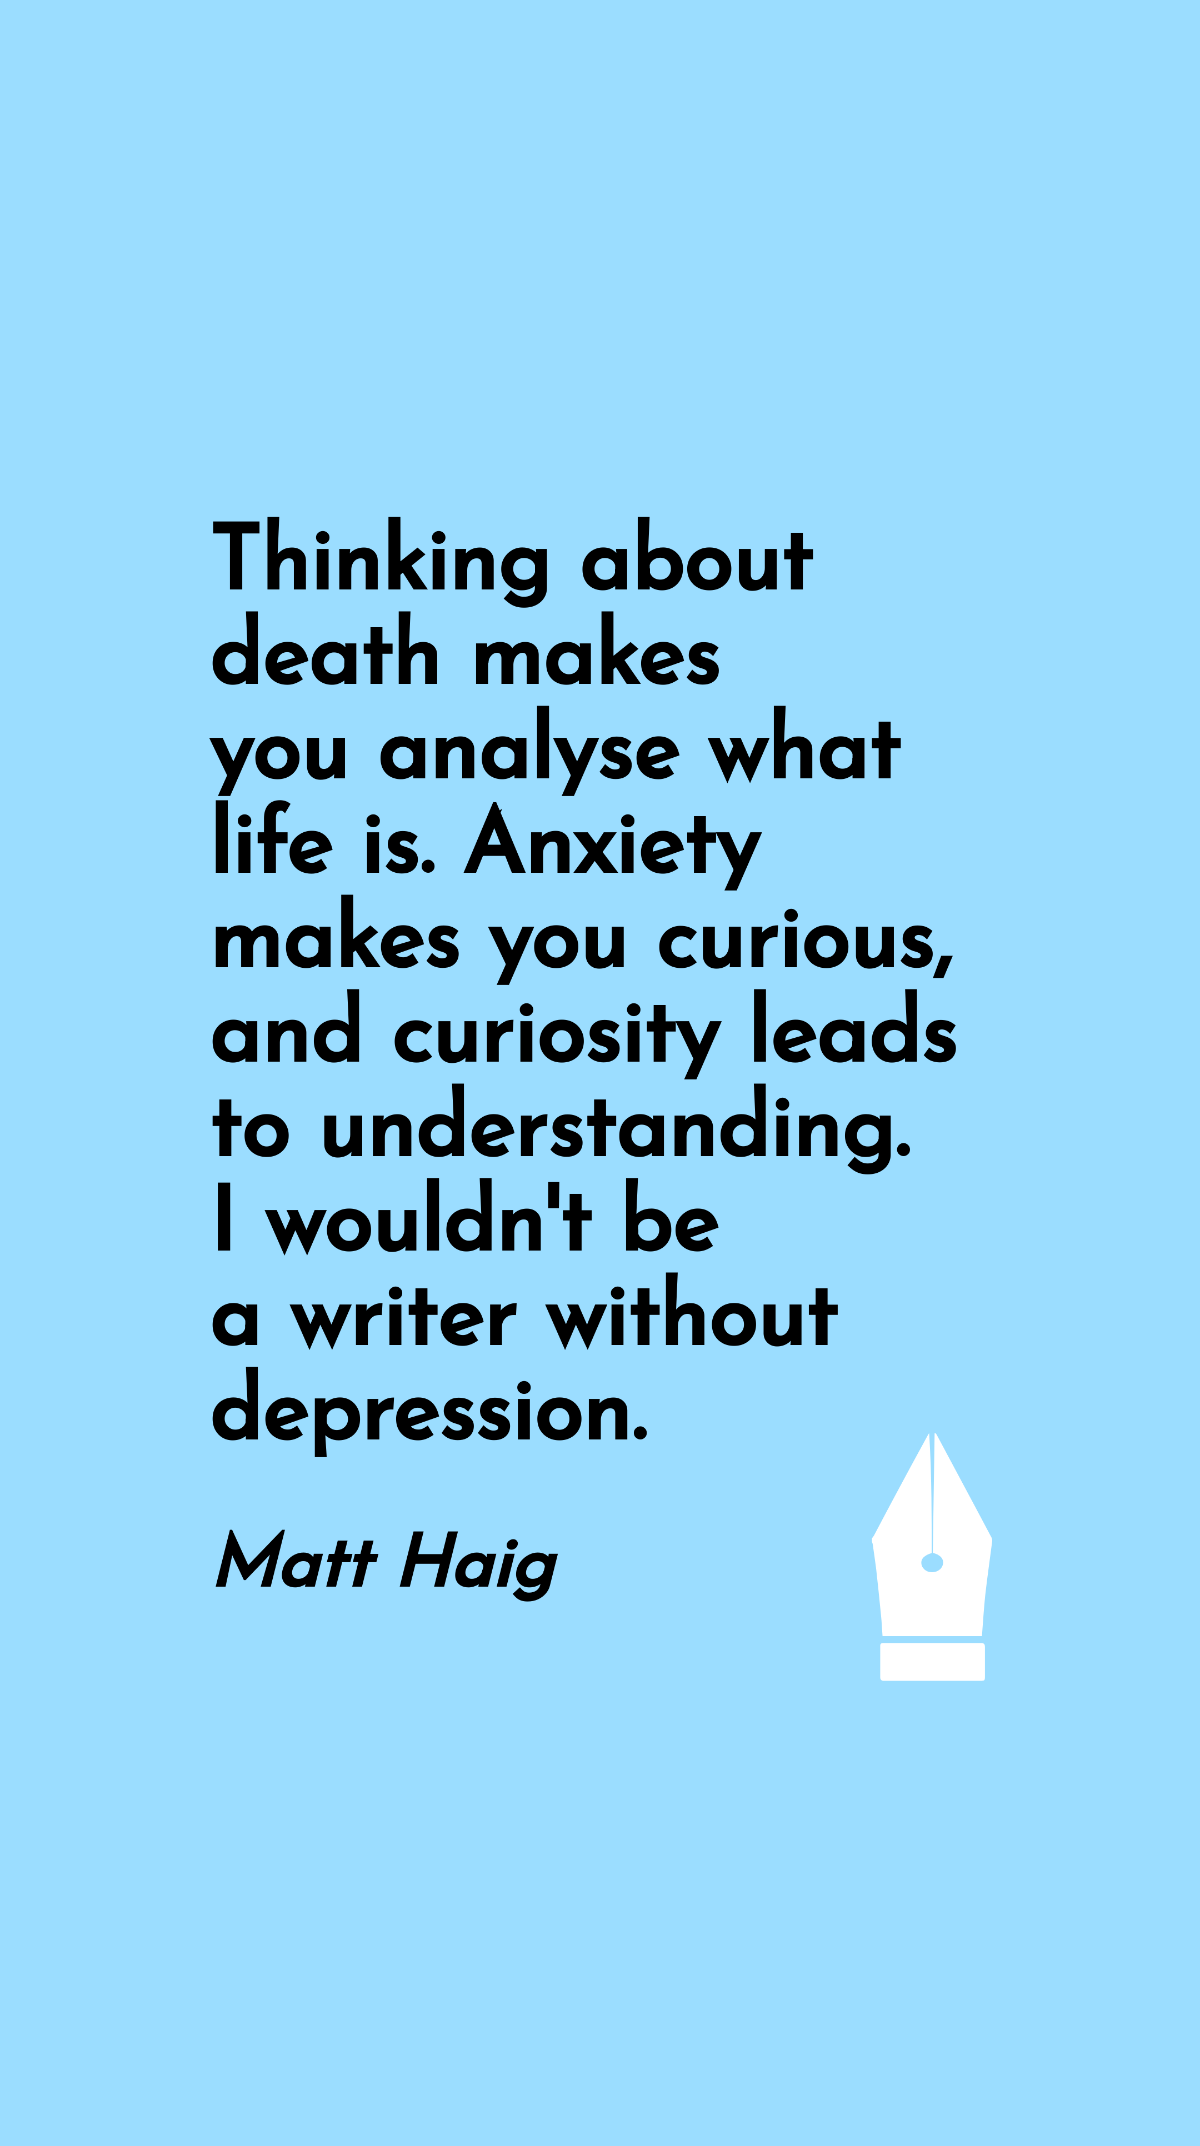 Matt Haig - Thinking about death makes you analyse what life is. Anxiety makes you curious, and curiosity leads to understanding. I wouldn't be a writer without depression. Template